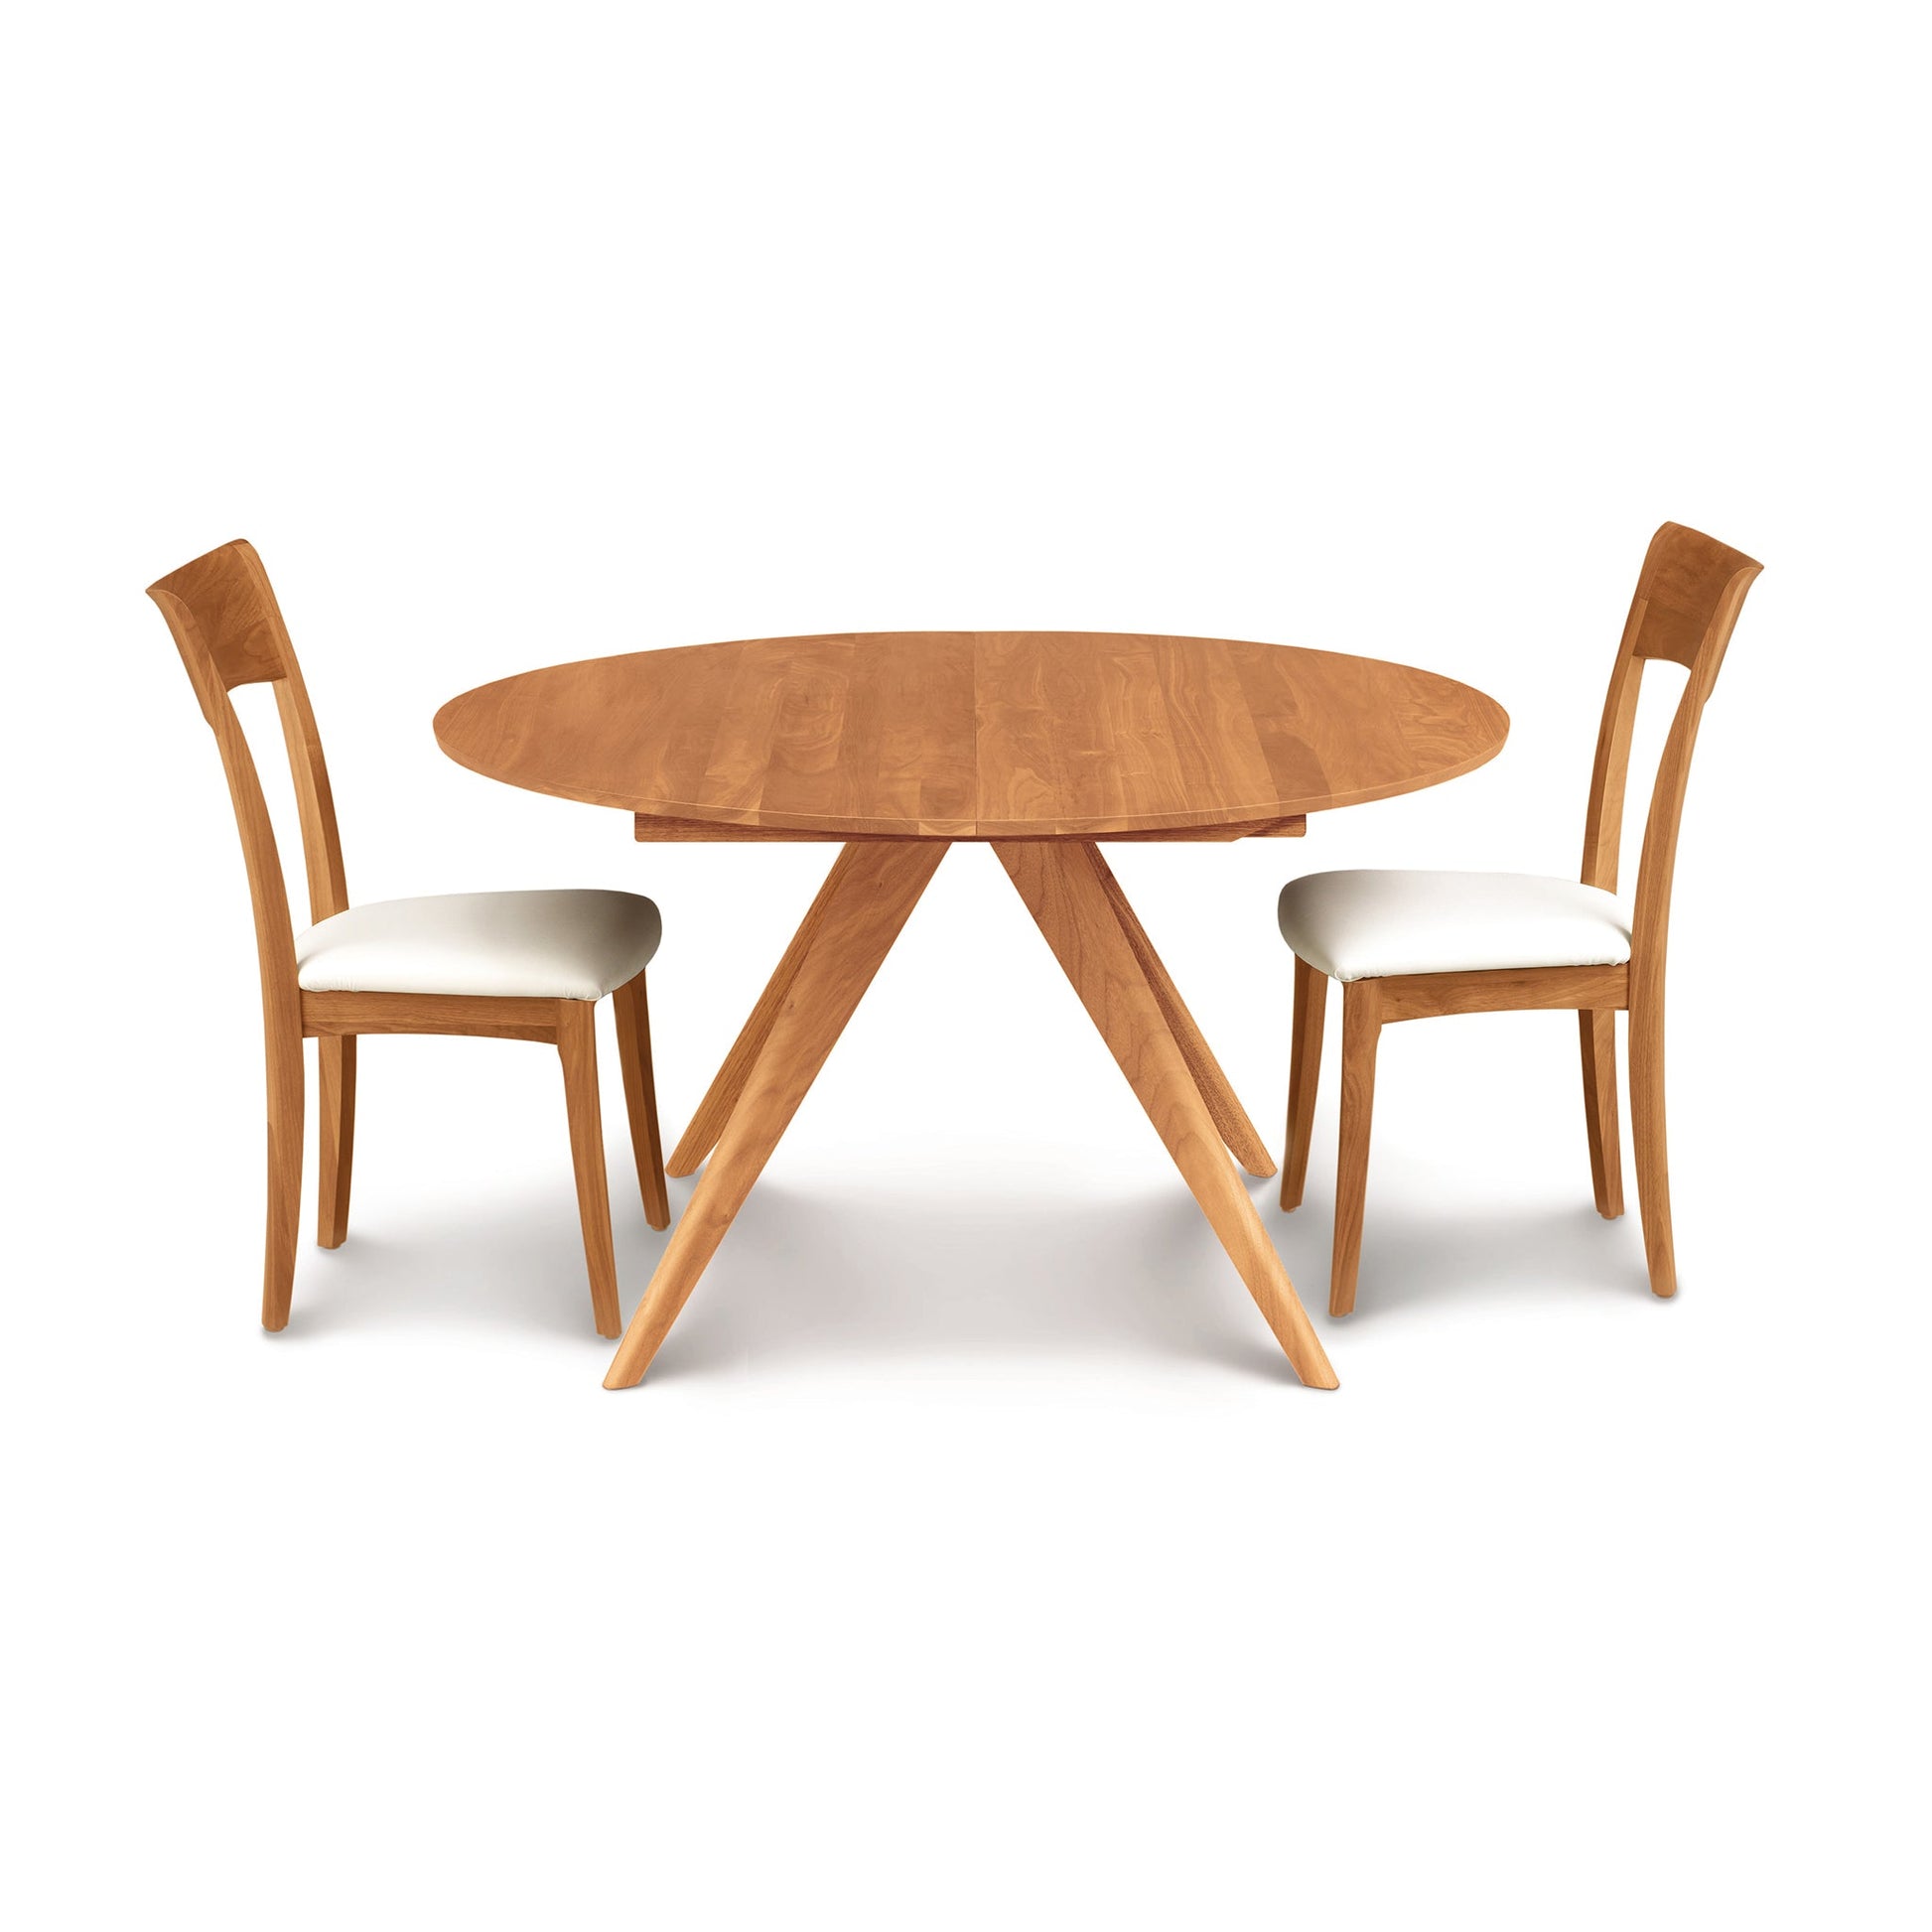 A round wooden dining table with two chairs.